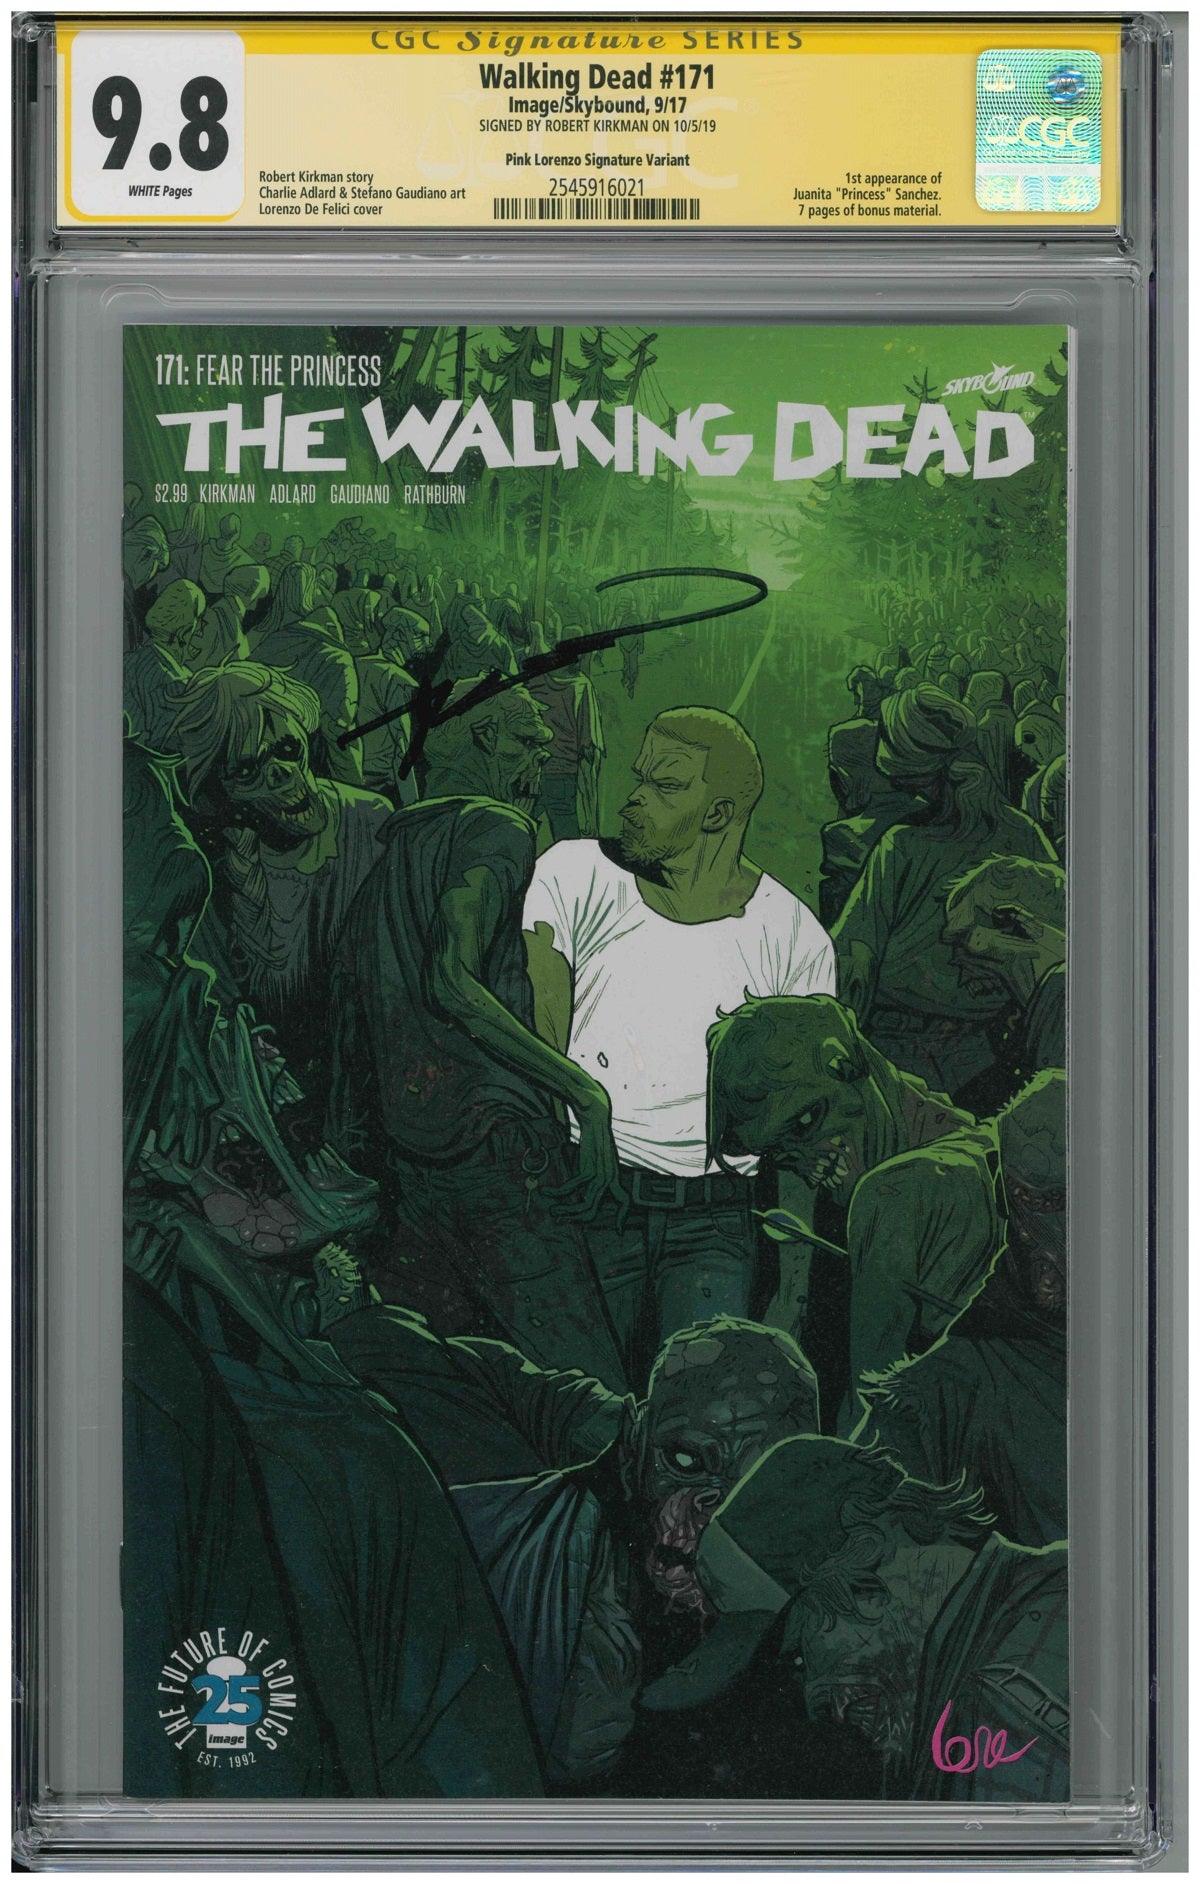 CGC THE WALKING DEAD #171 PINK LORENZO VARIANT (9.8) SIGNATURE SERIES - SIGNED BY ROBERT KIRKMAN